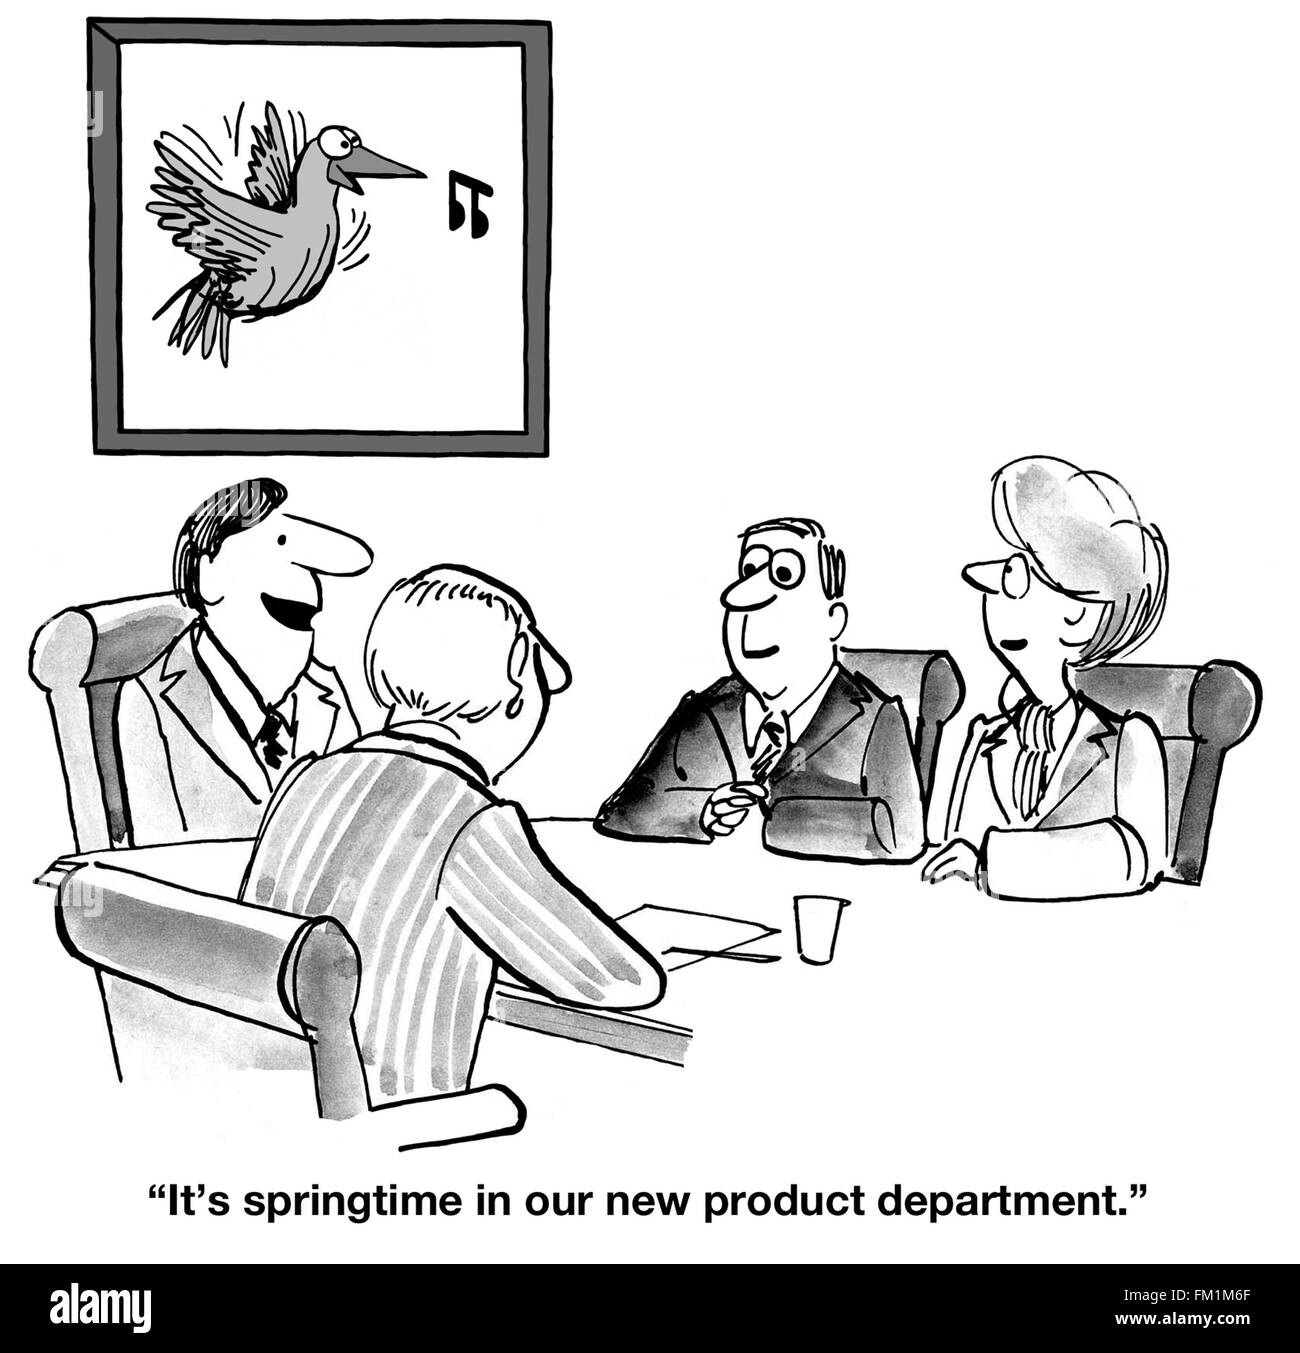 Business cartoon about new products. Stock Photo